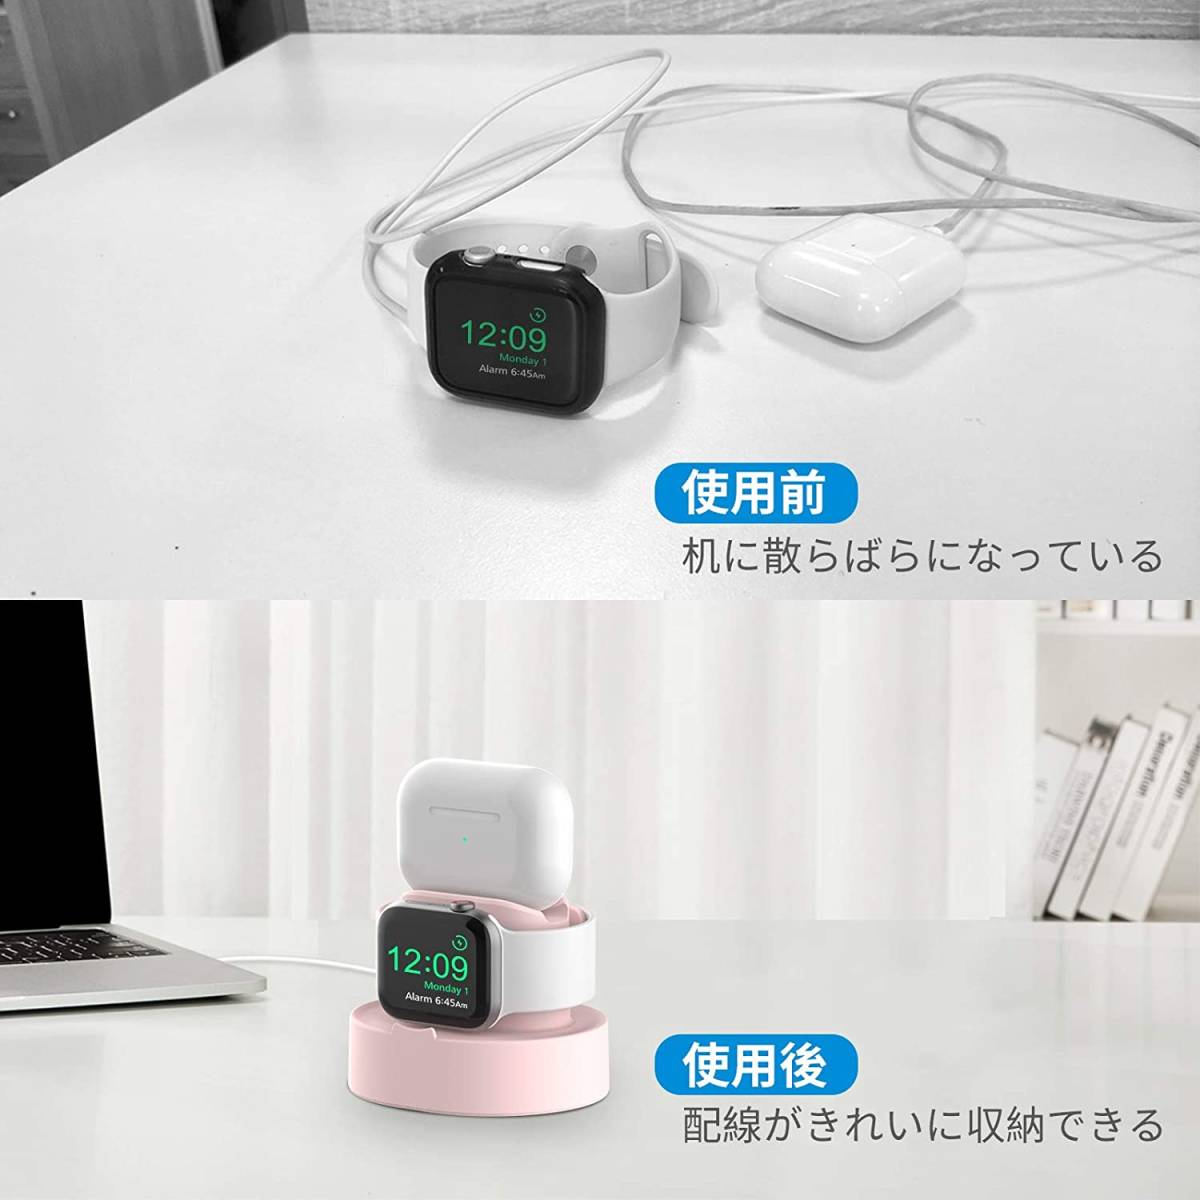  pink 1 pcs 2 position Apple Watch AirPods all sorts correspondence multifunction Stand Up ru watch air poz pen sill wireless charger charge stand 